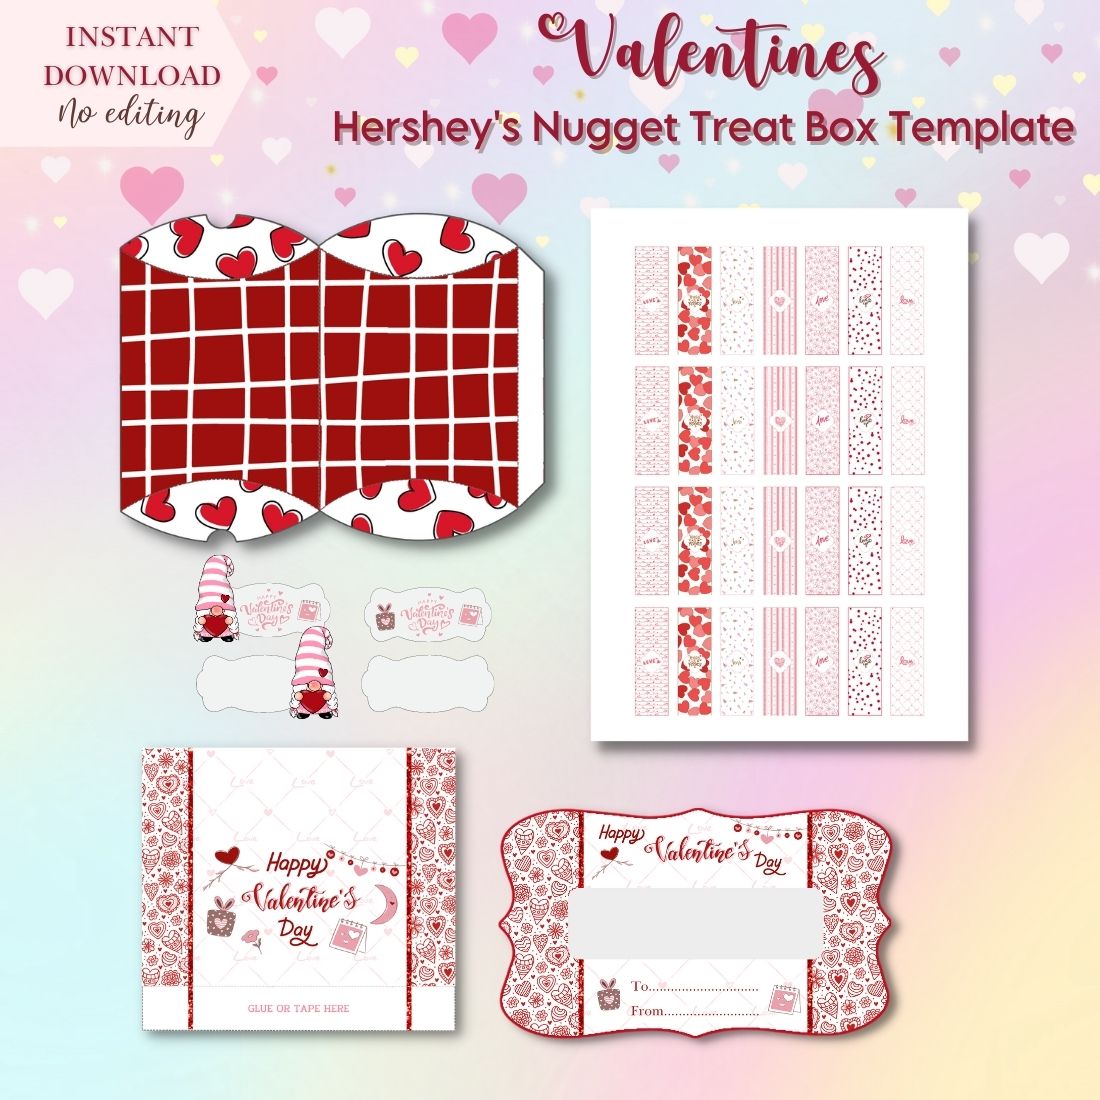 Valentines Wrap Box Printable Template cover image.